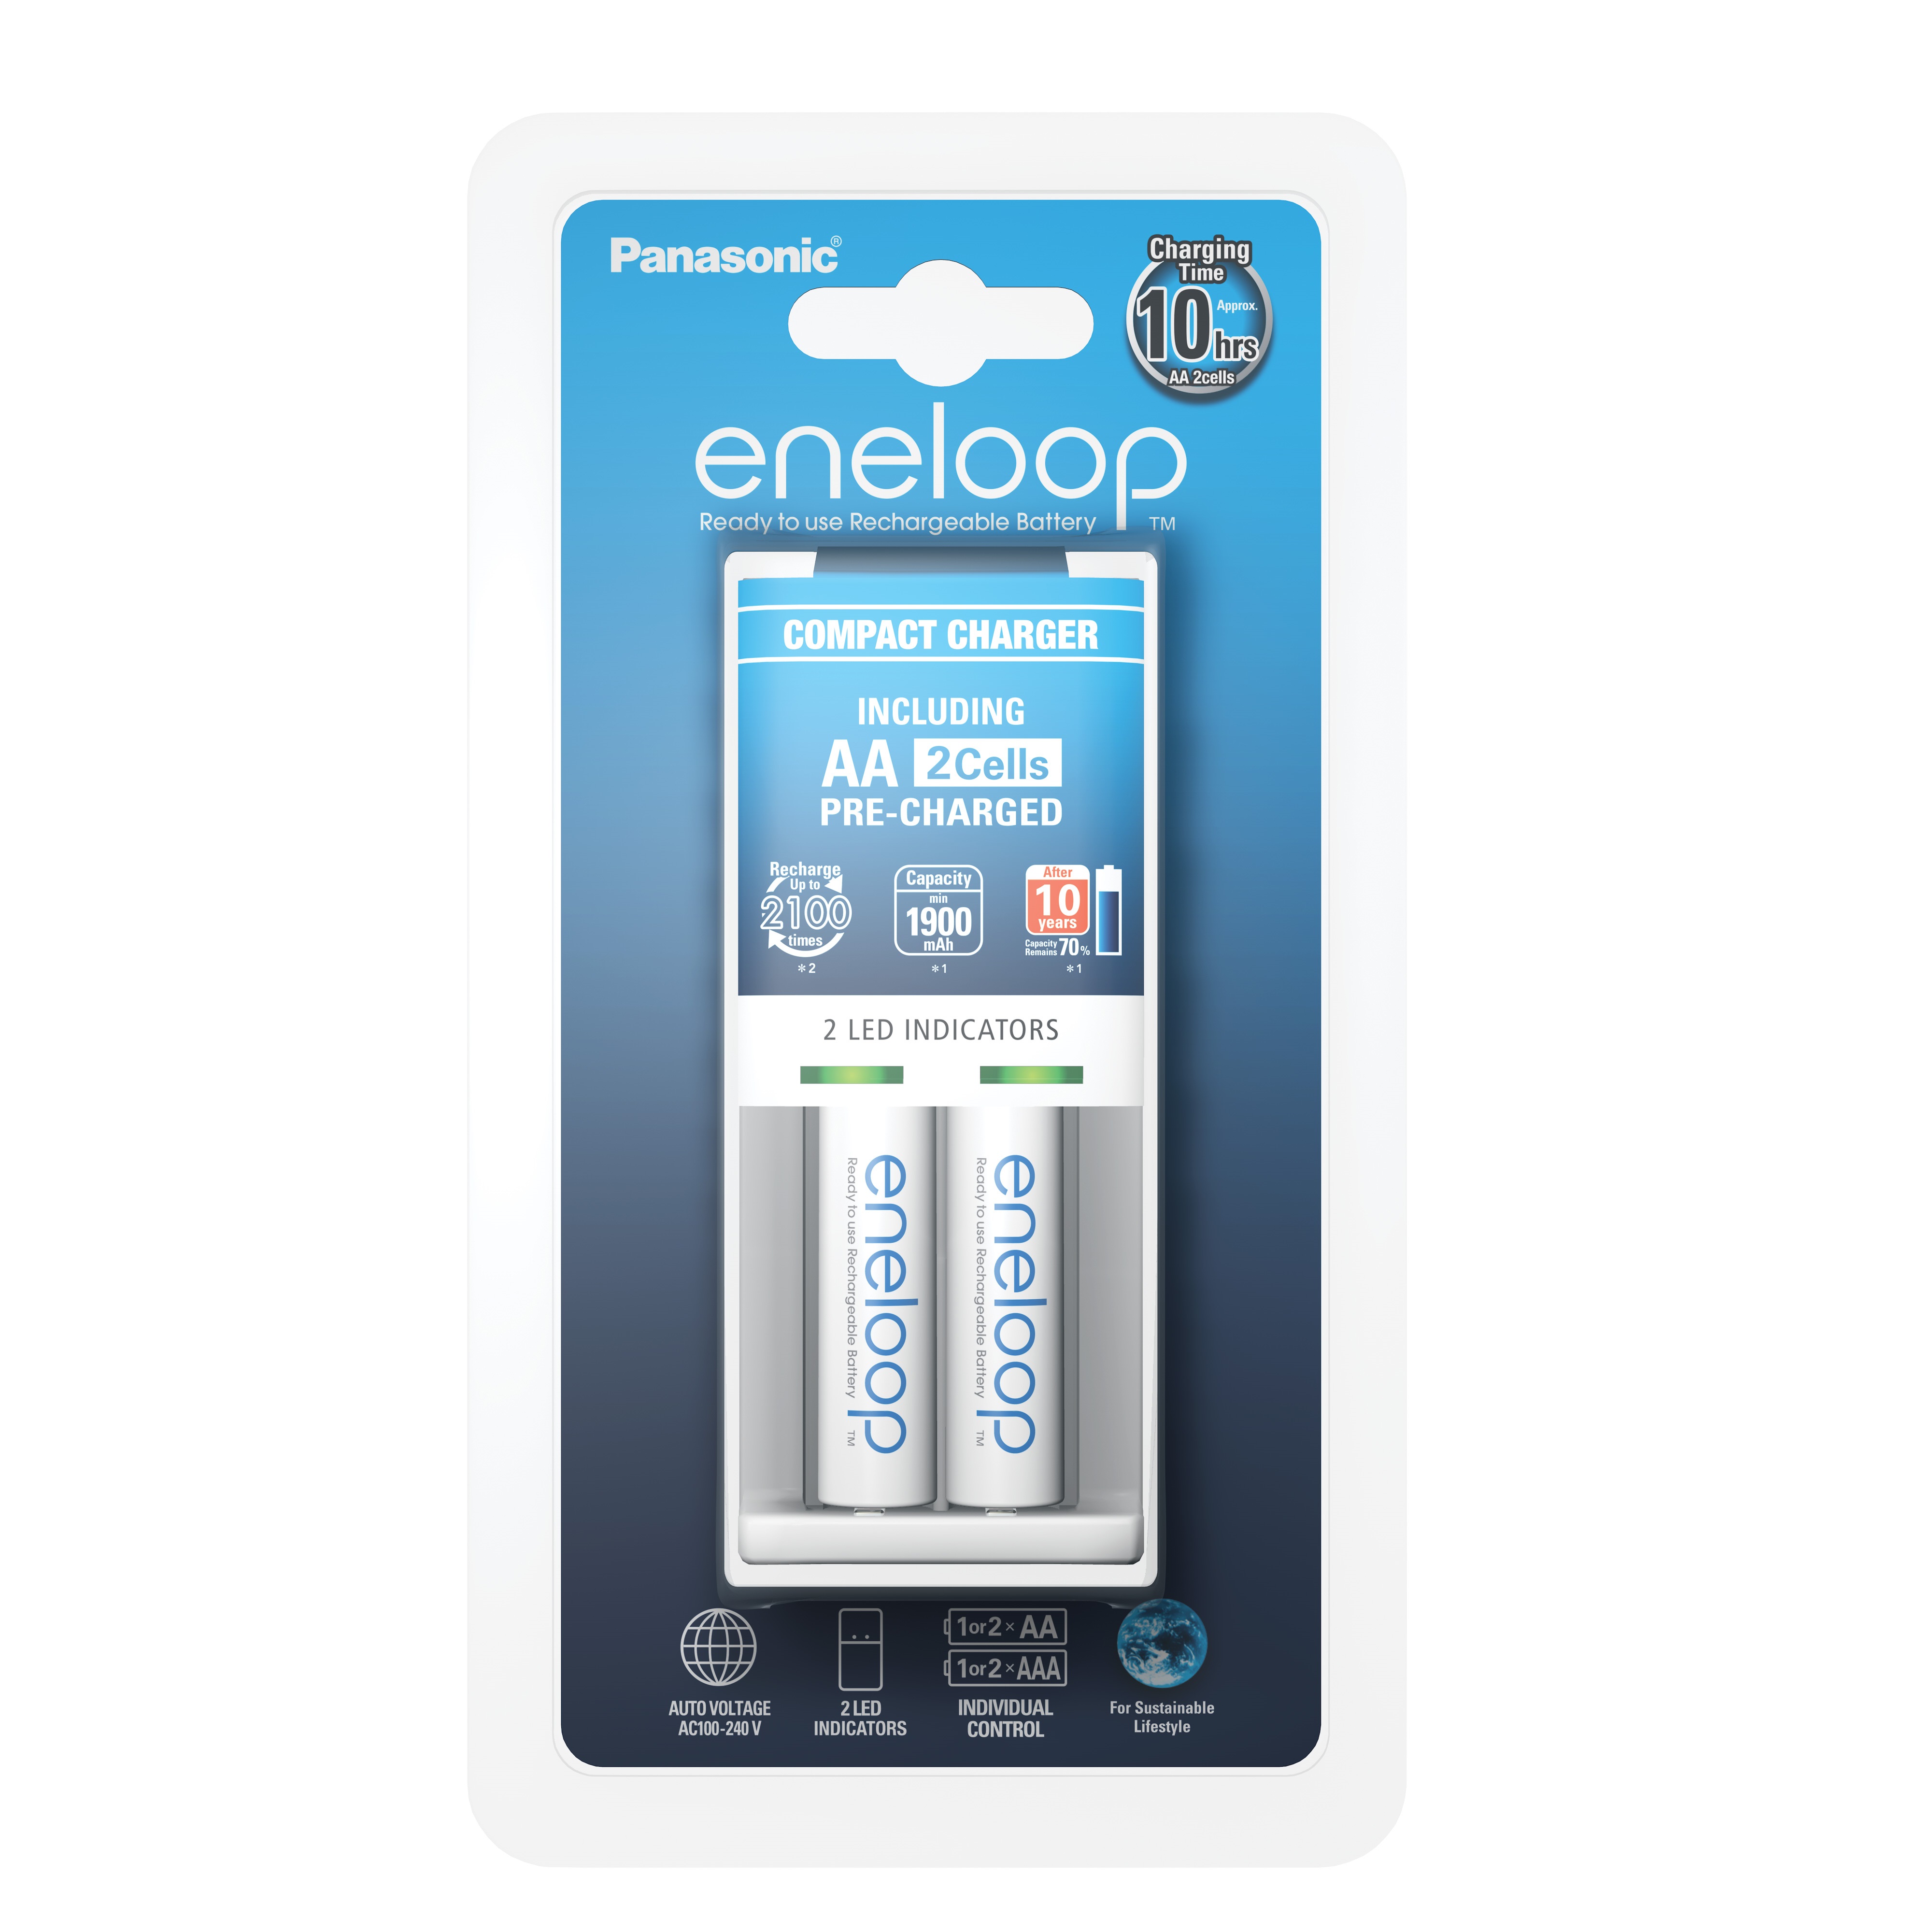 Panasonic Eneloop Aa Battery Charger With 2 Batteries Bq Cc50e Bk 3mcce